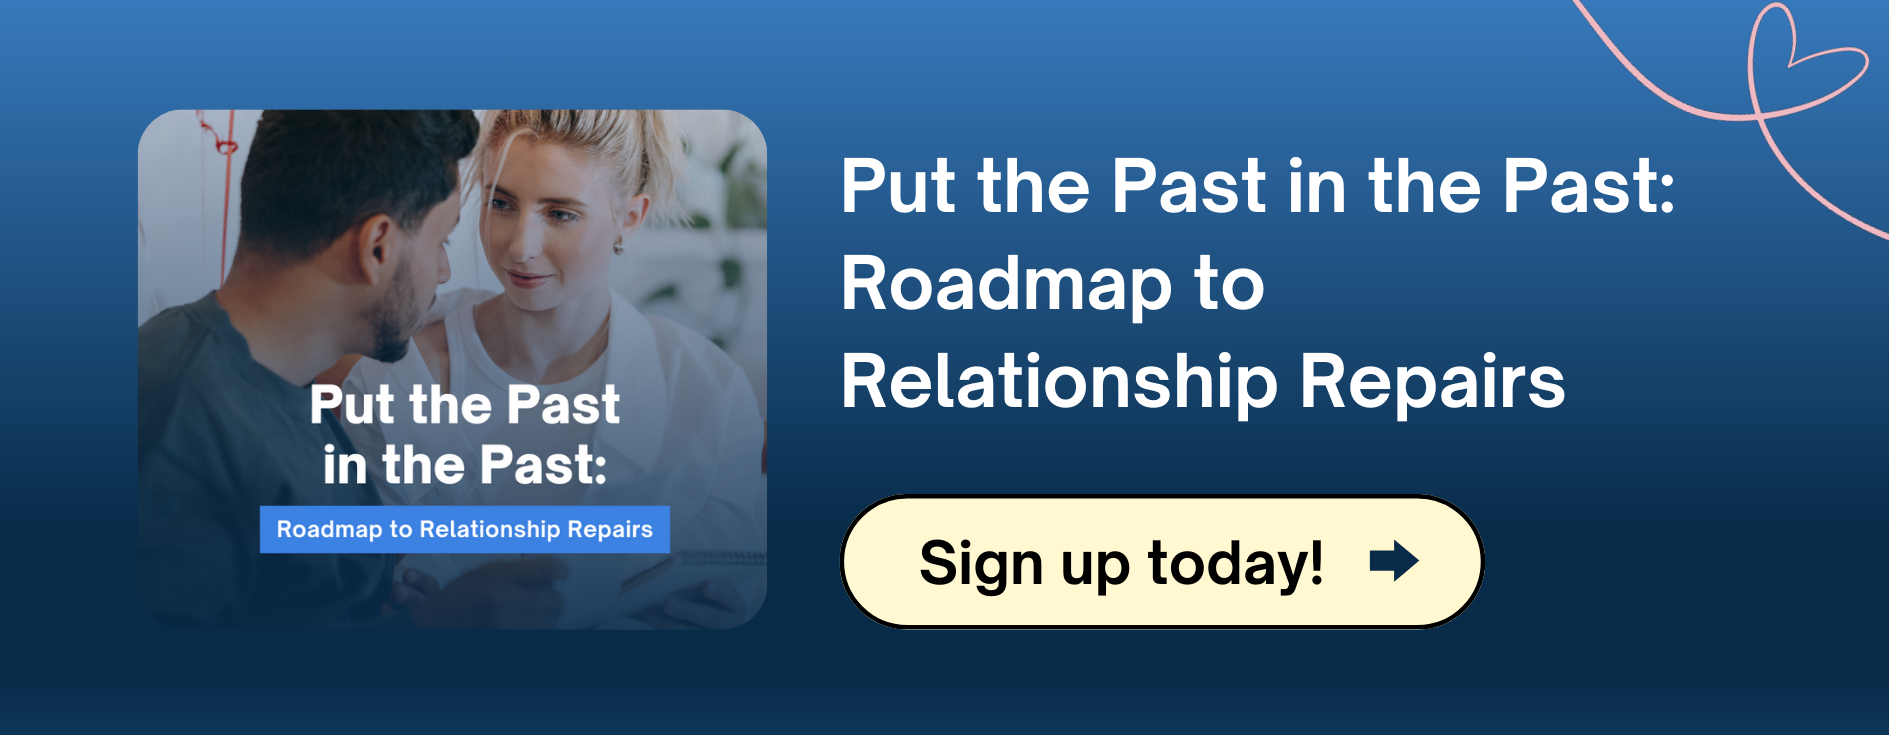 Put the Past in the Past Roadmap to Relationship Repairs Course